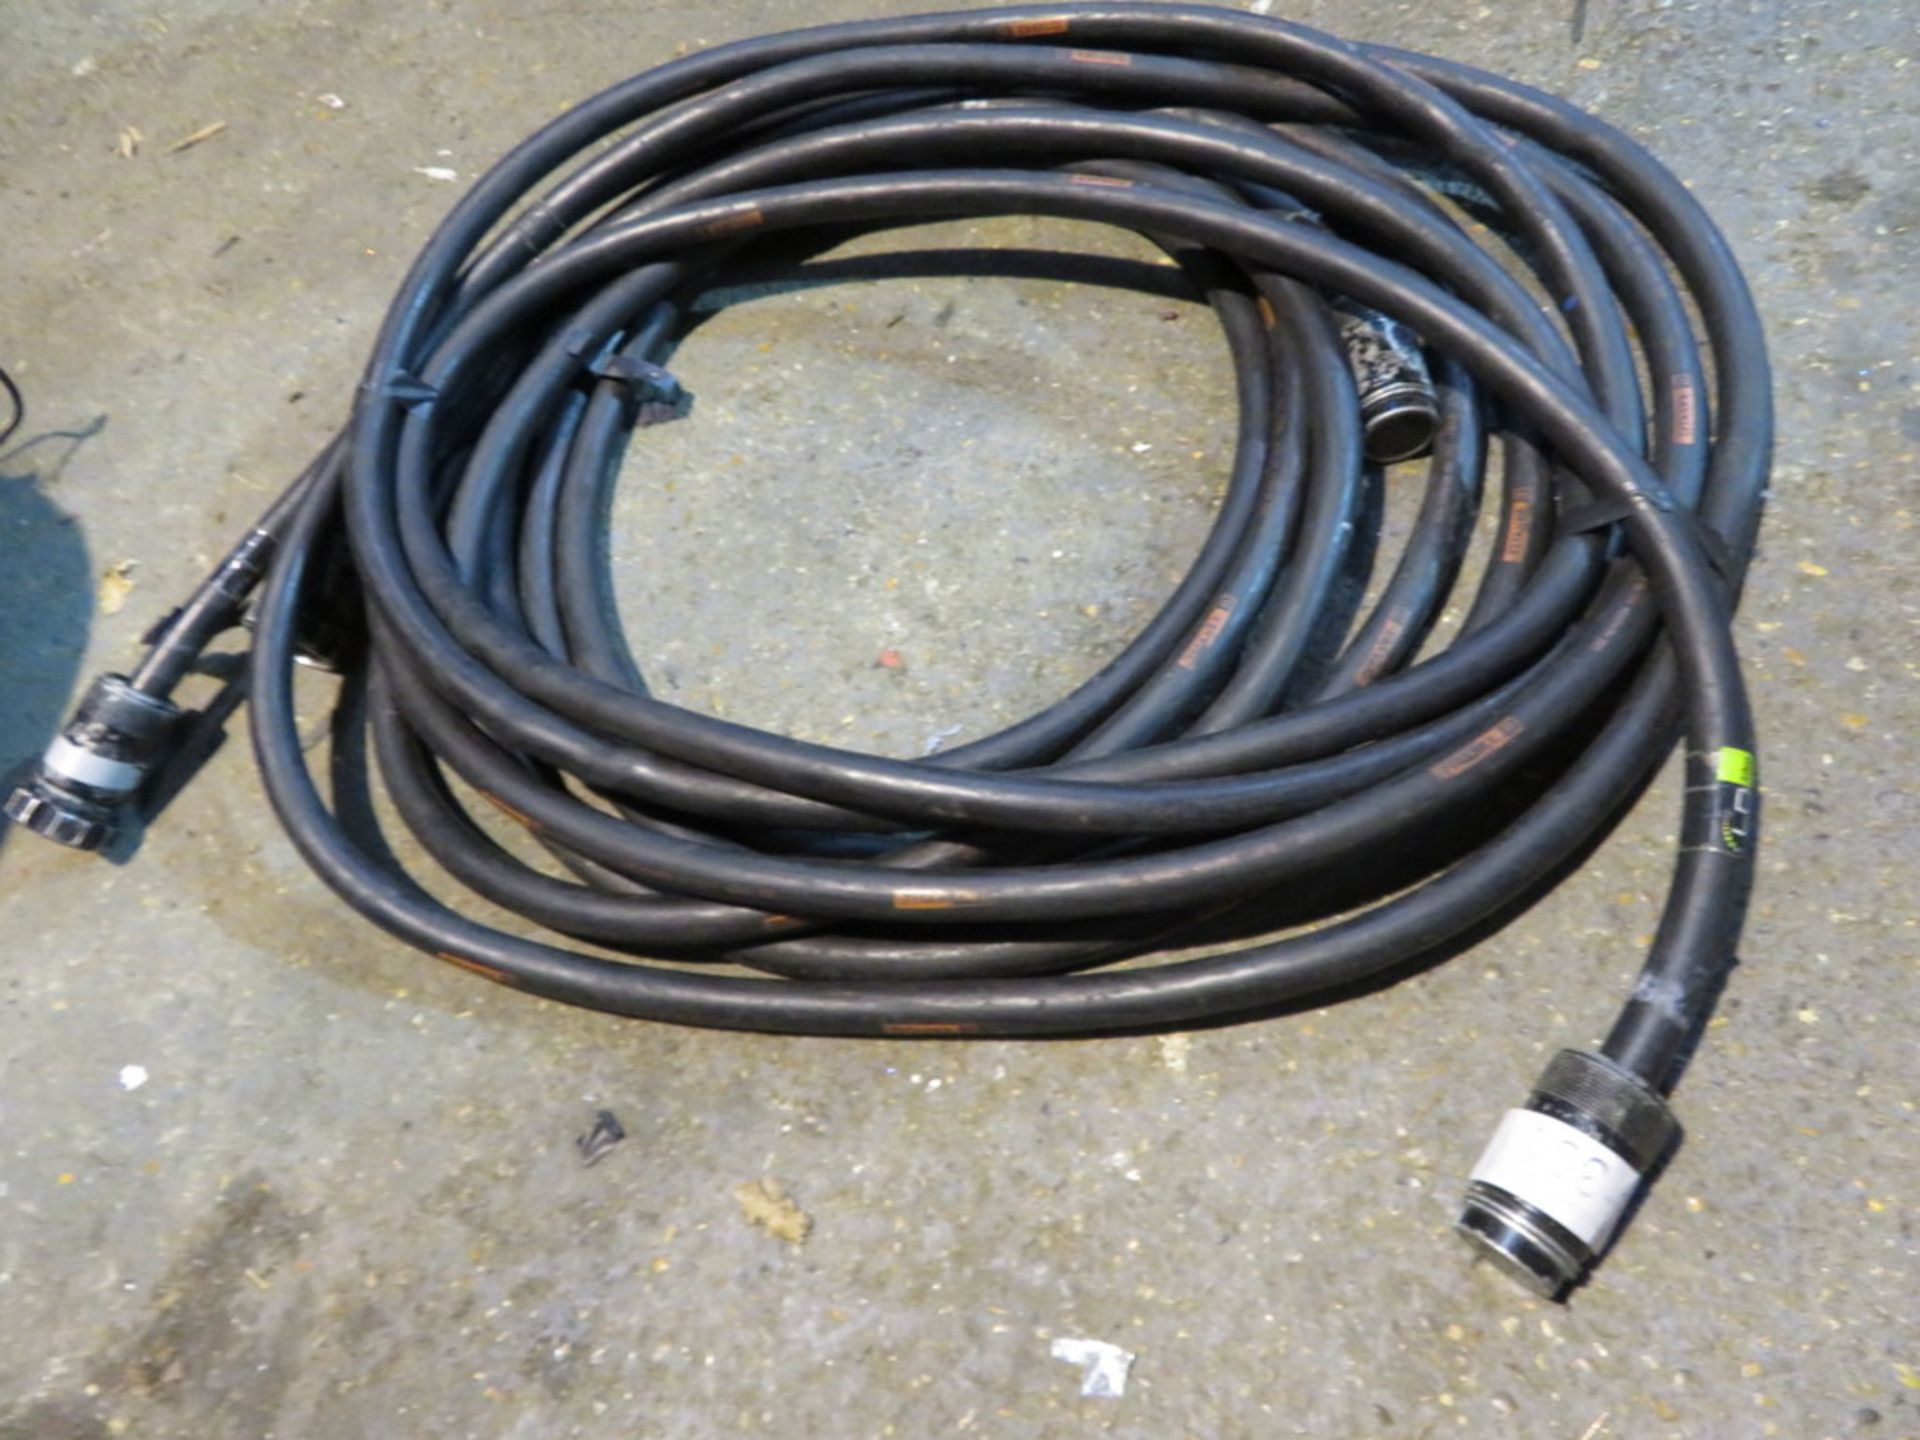 2 x 10m Socapex Cable - 19core 2.5mm ho7 - Image 2 of 4